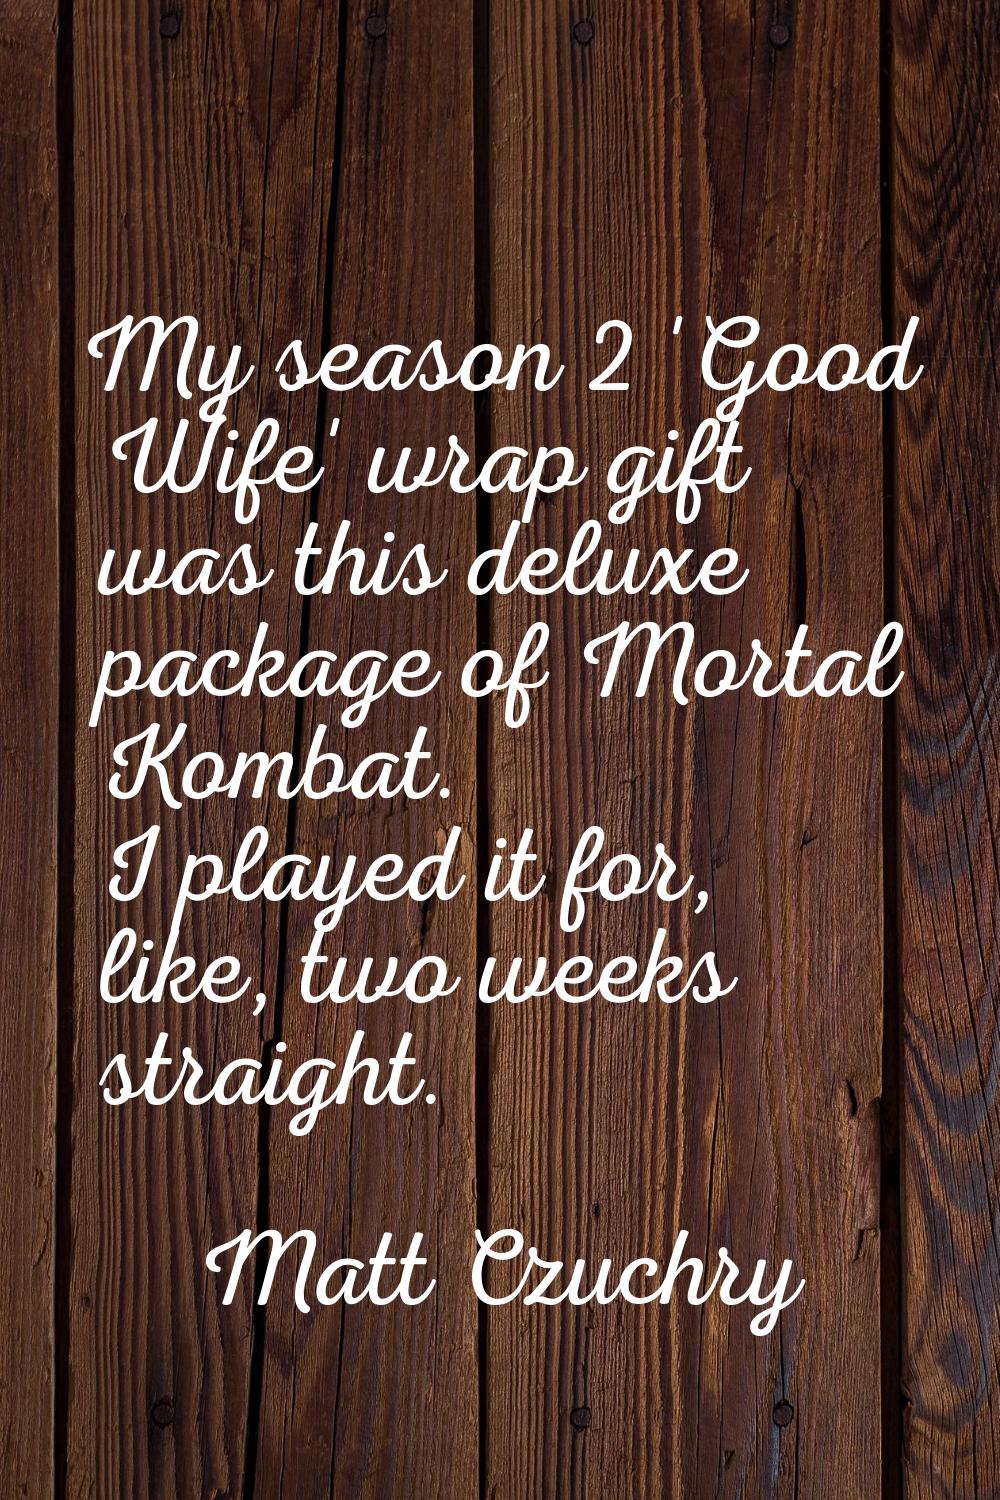 My season 2 'Good Wife' wrap gift was this deluxe package of Mortal Kombat. I played it for, like, 